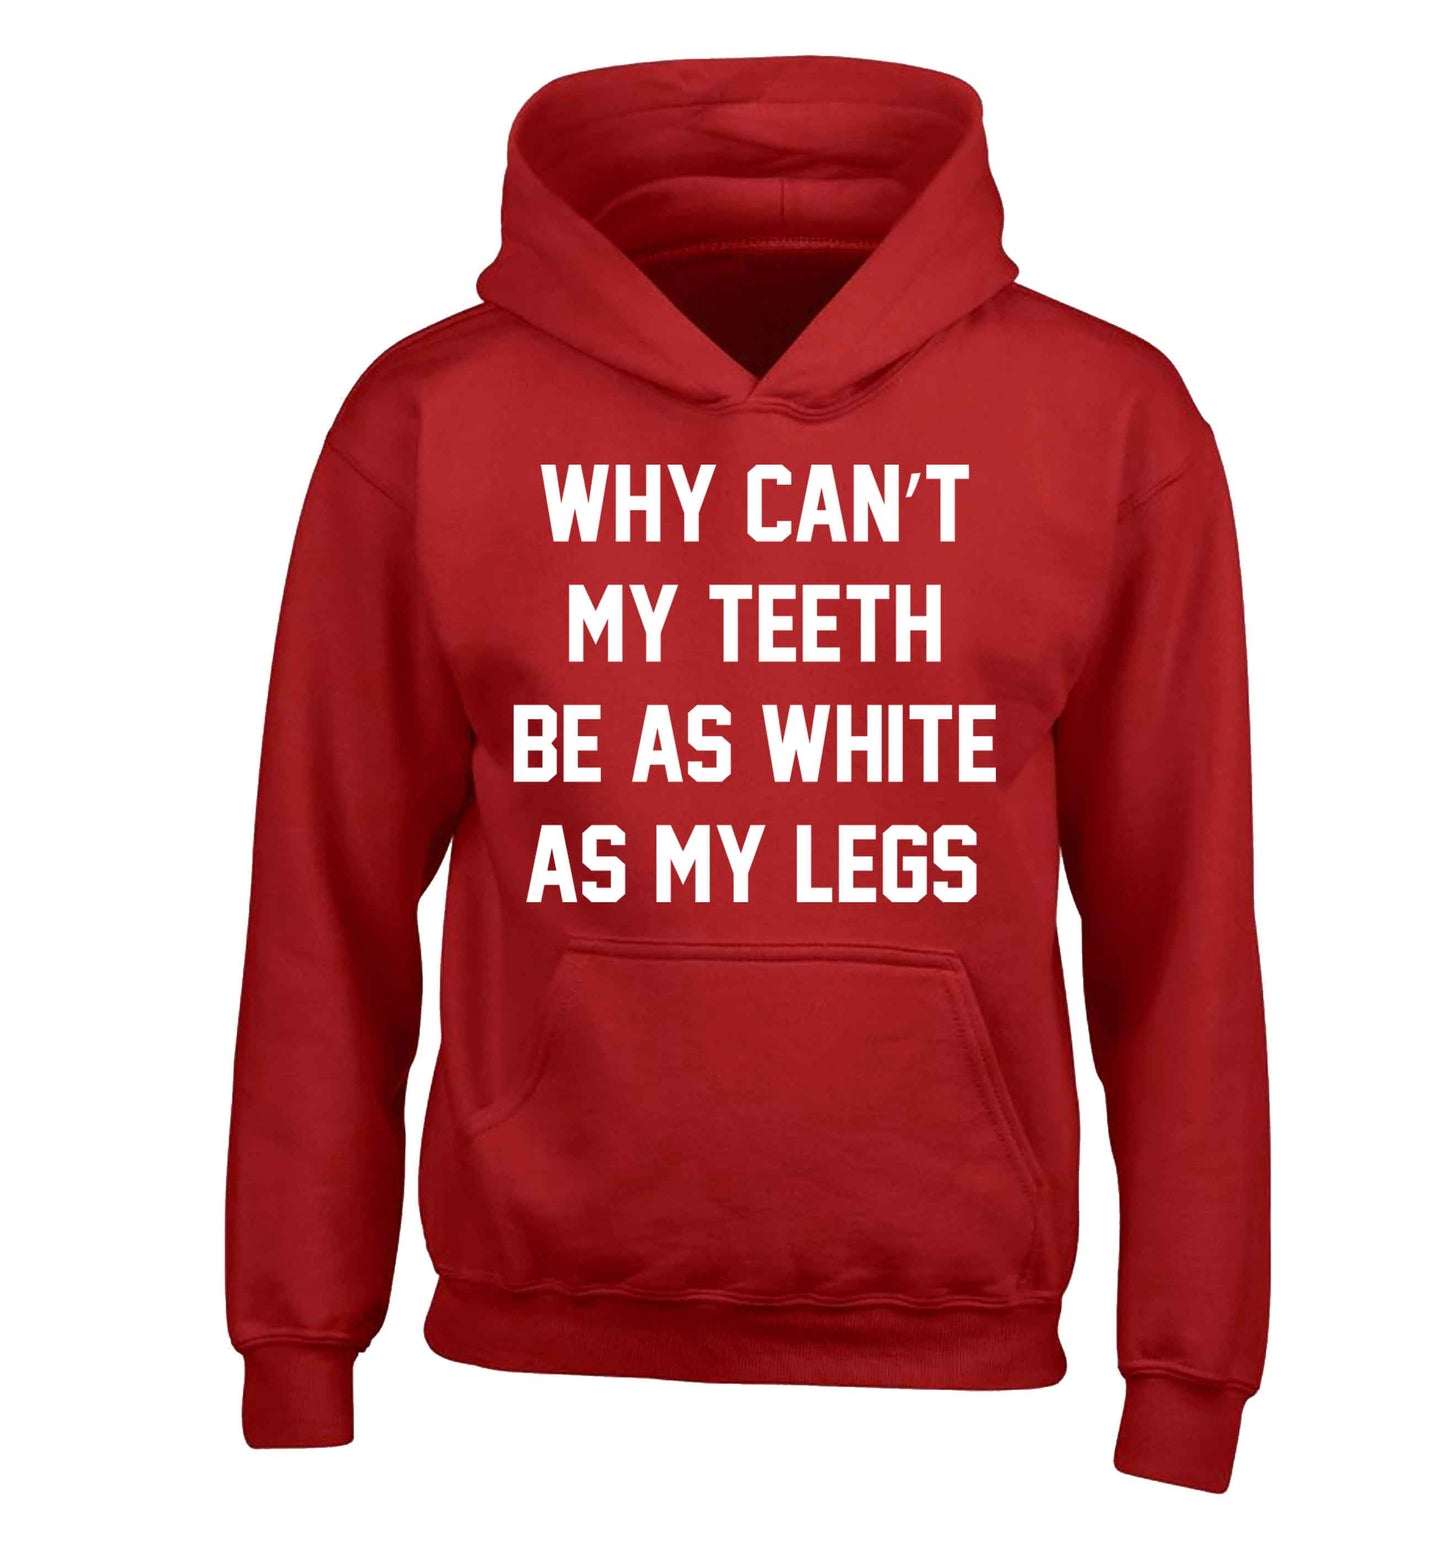 Why can't my teeth be as white as my legs children's red hoodie 12-13 Years